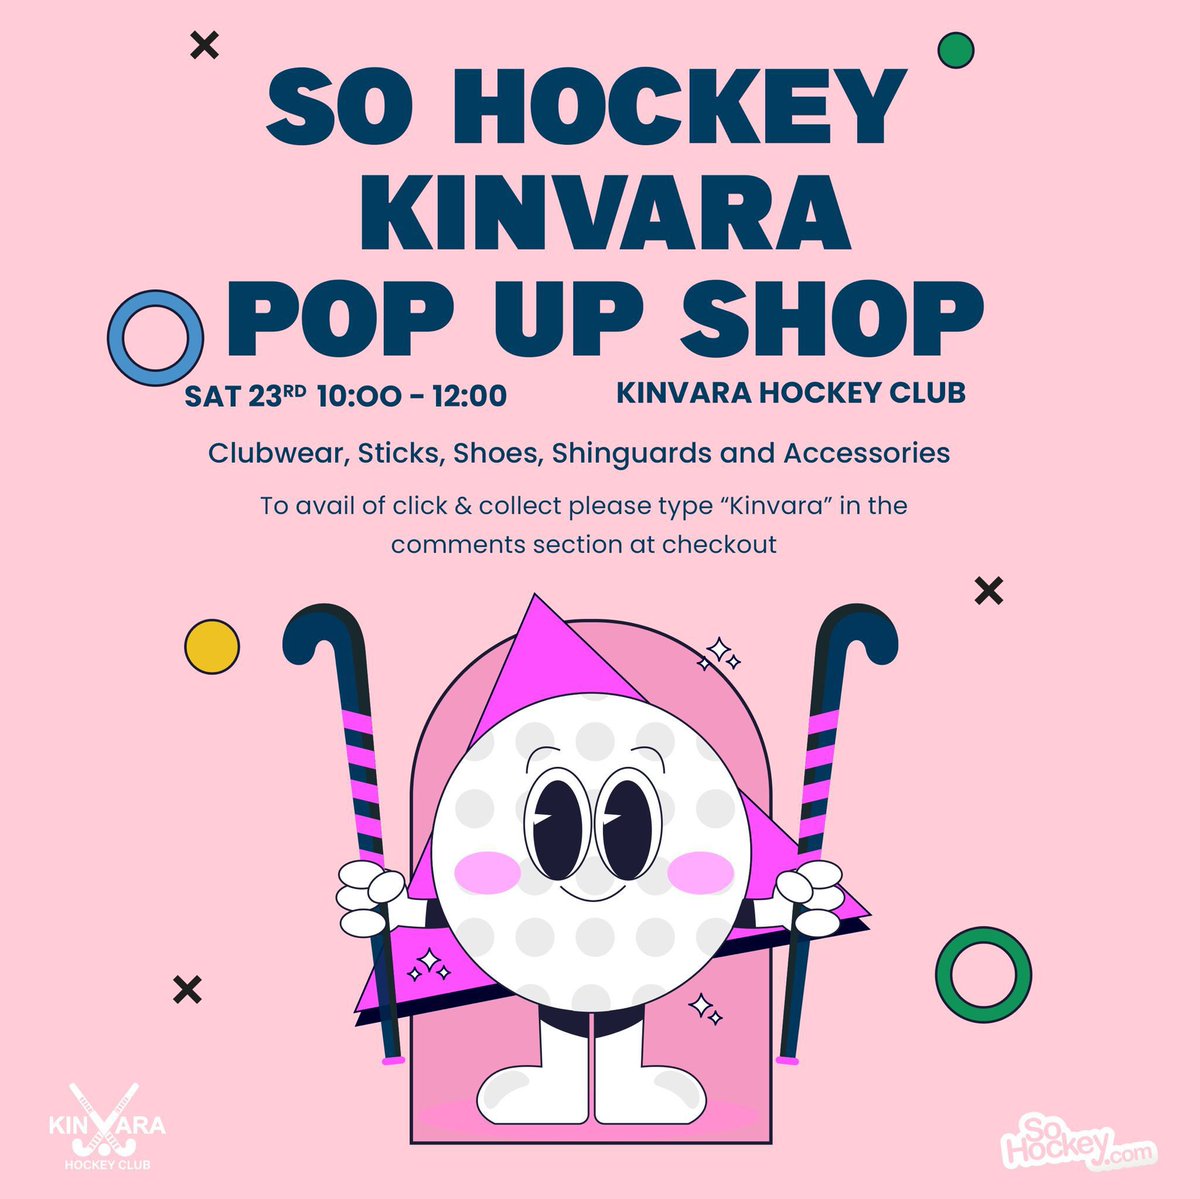 KINVARA POP-UP SHOP 😍😩

This Saturday we will be at @KinvaraHockey for a pop up shop 👀 click and collect options are available 😮
.
.
#sohockey #fieldhockey #hockey #kinvarahockeyclub #kinvara #kinvarahockey